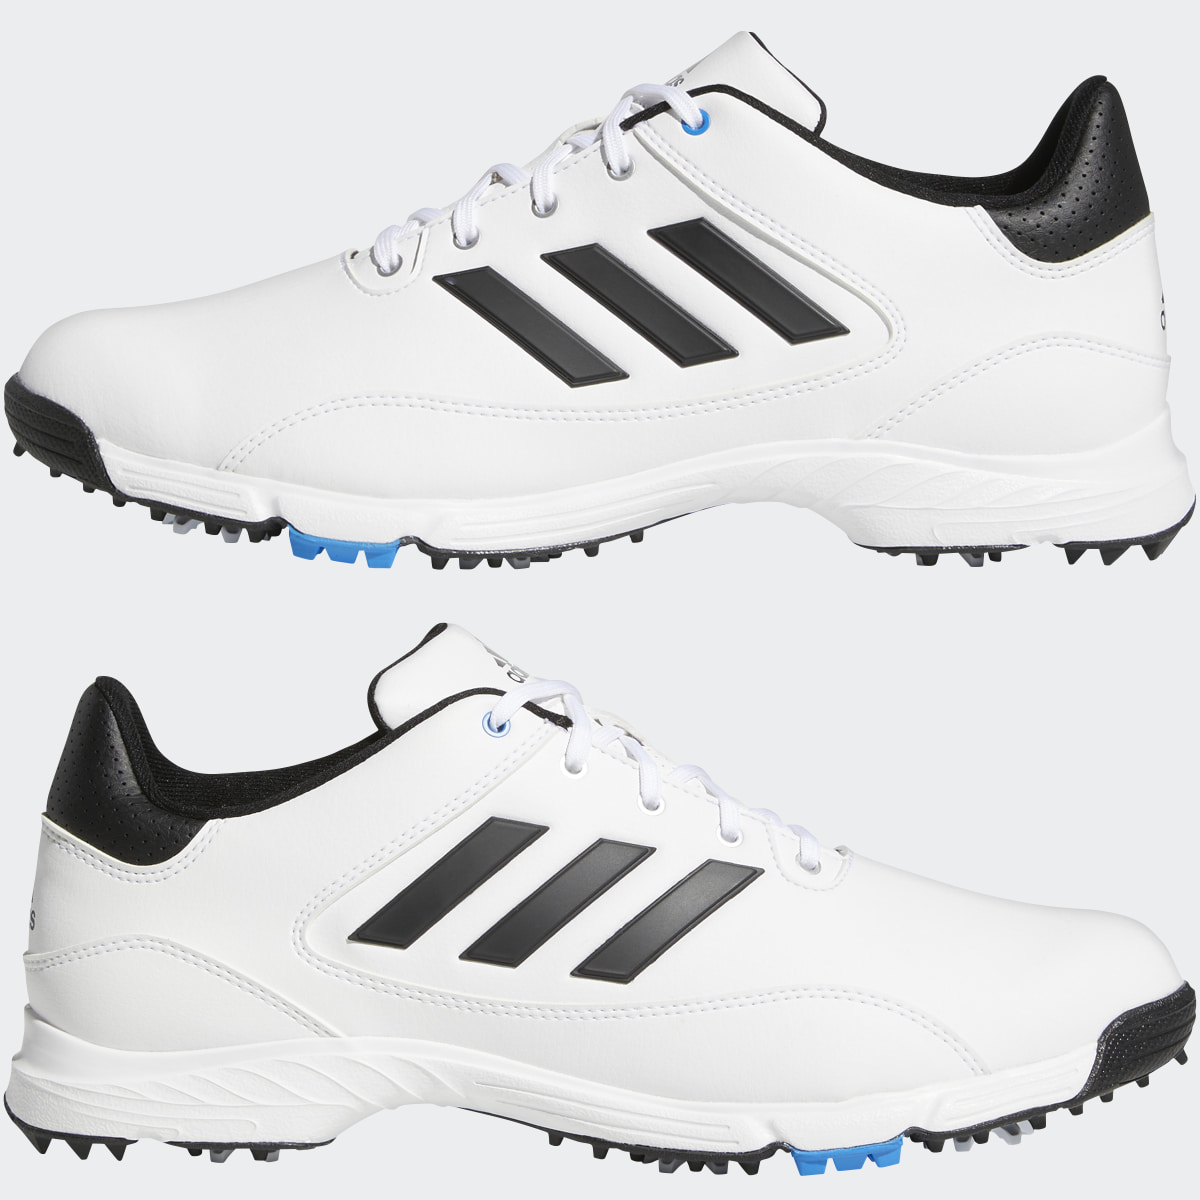 Adidas Golflite Max Wide Golf Shoes. 8